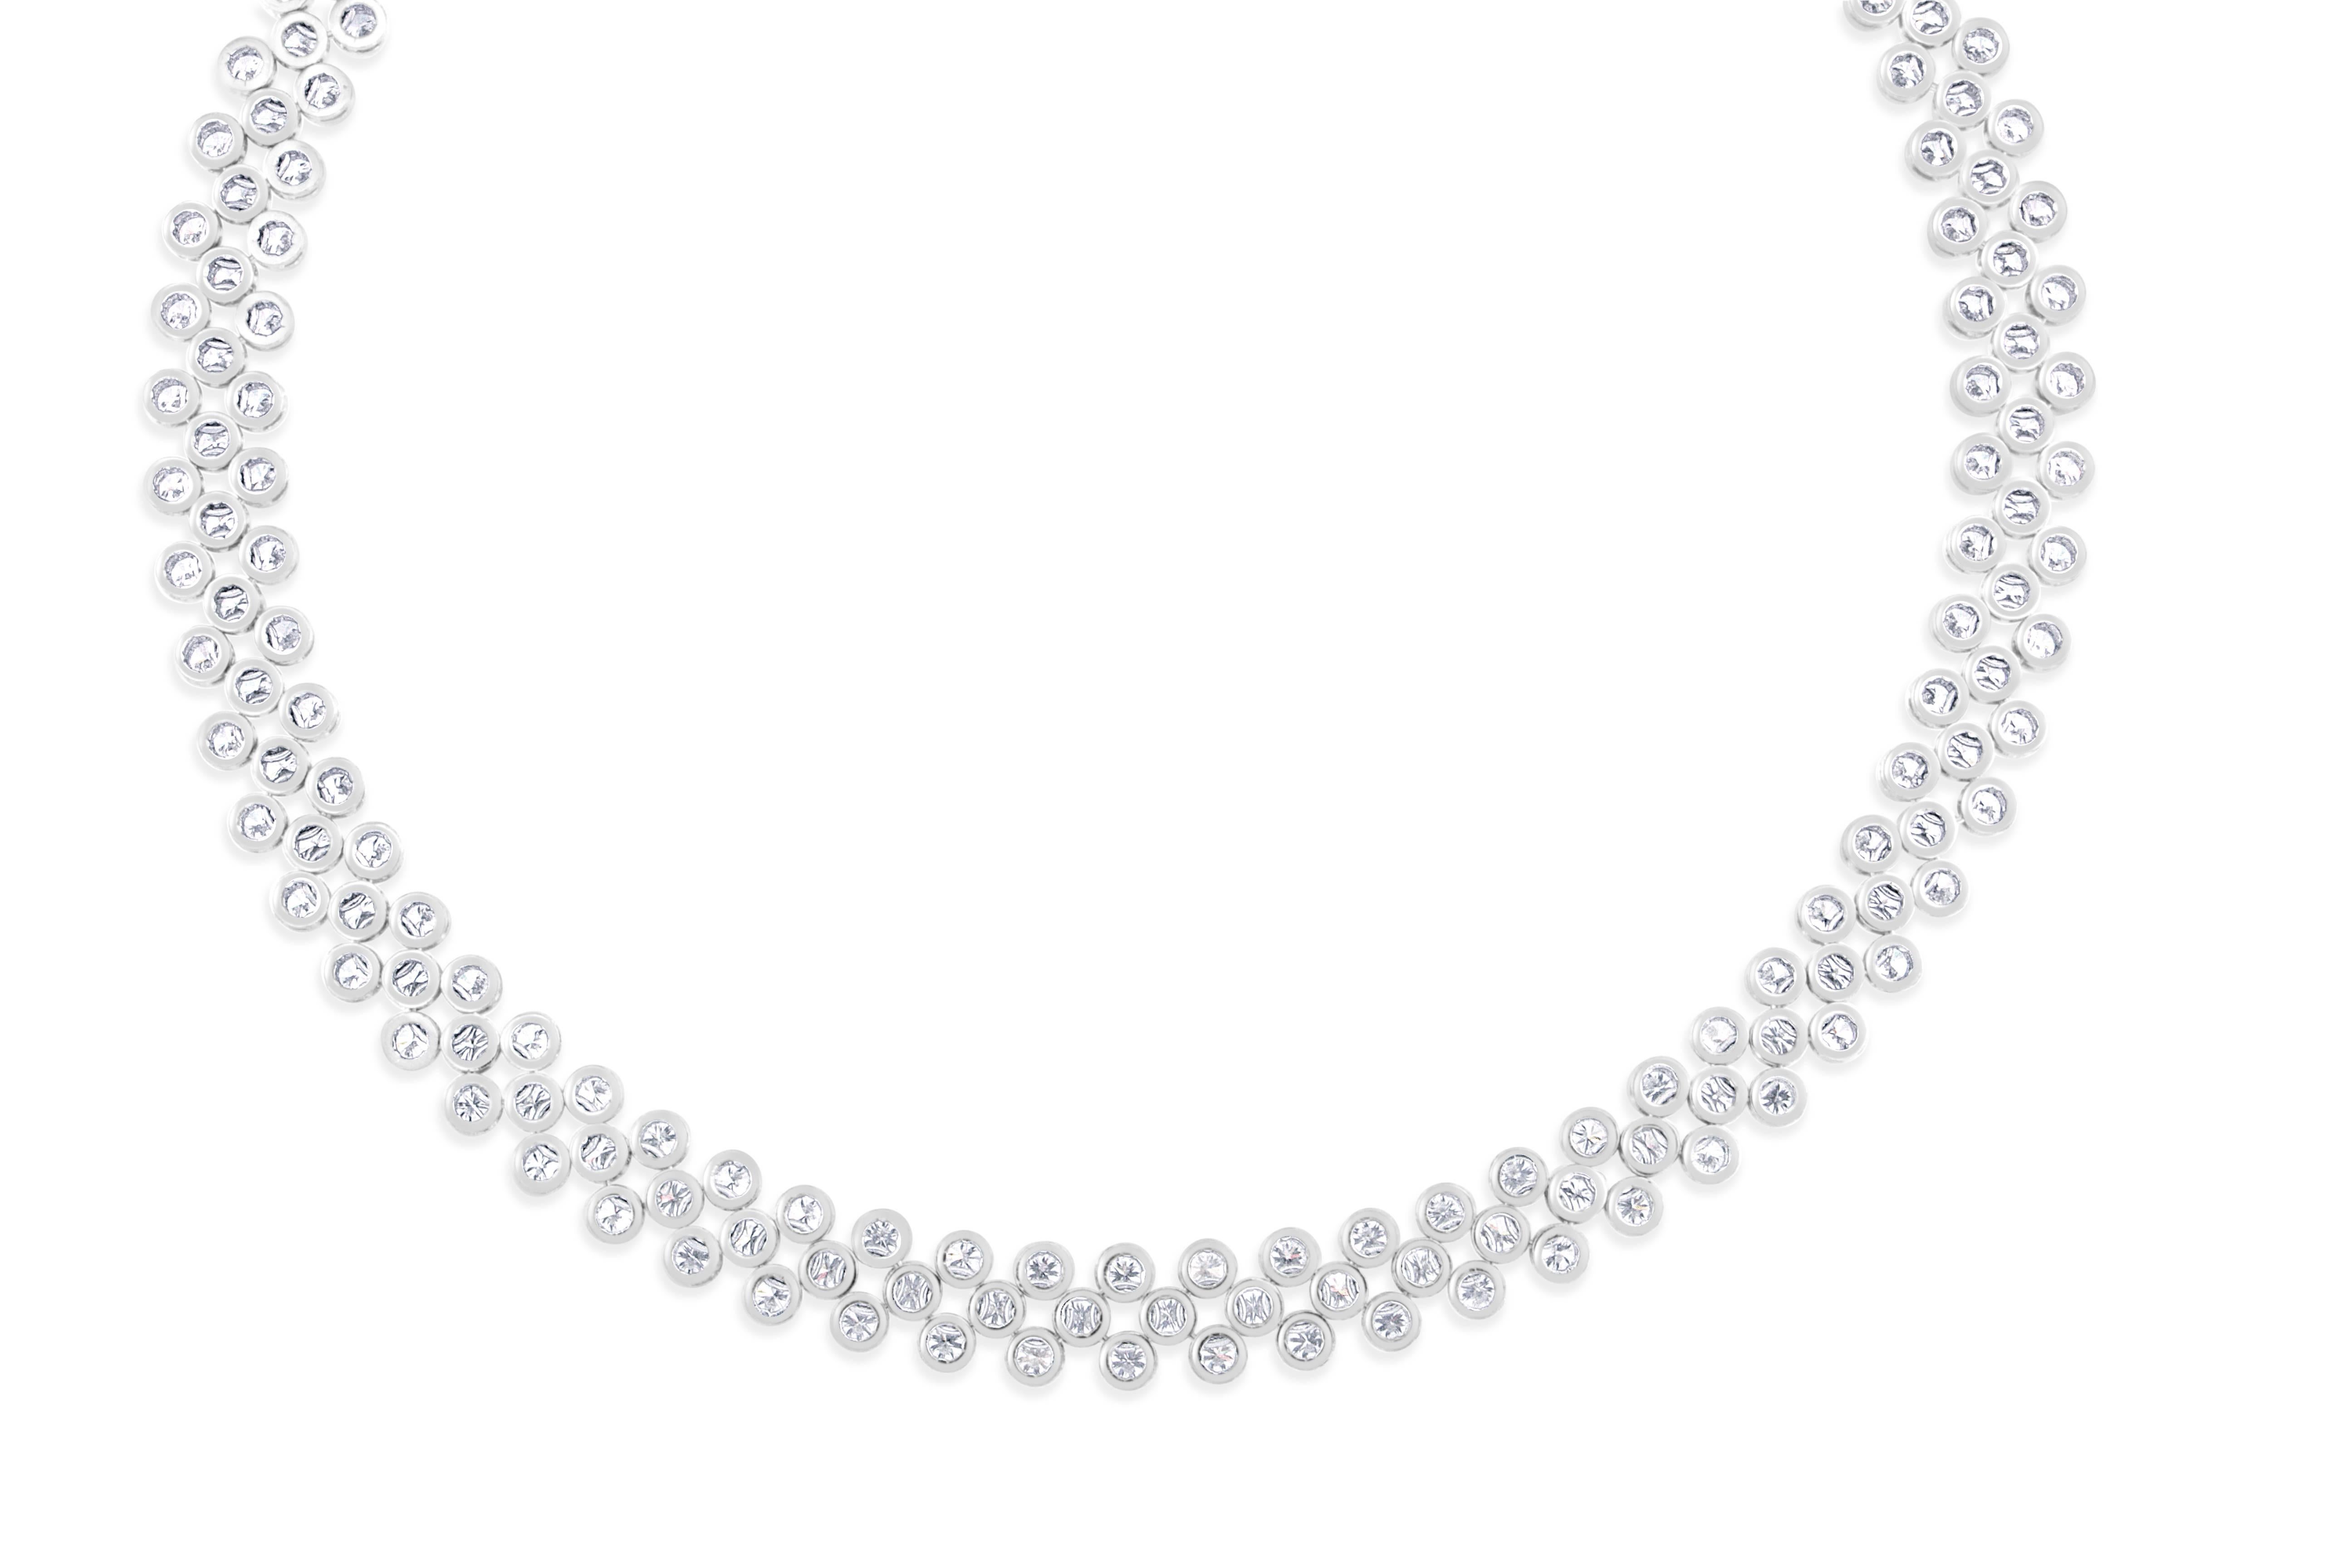 This divine diamond necklace features 293- round brilliant cut diamonds weighing 19.95 carats total, having VS clarity and G color. This necklace has the marvelous feature of being worn at two different lengths. It’s full length at 19 inches, or at